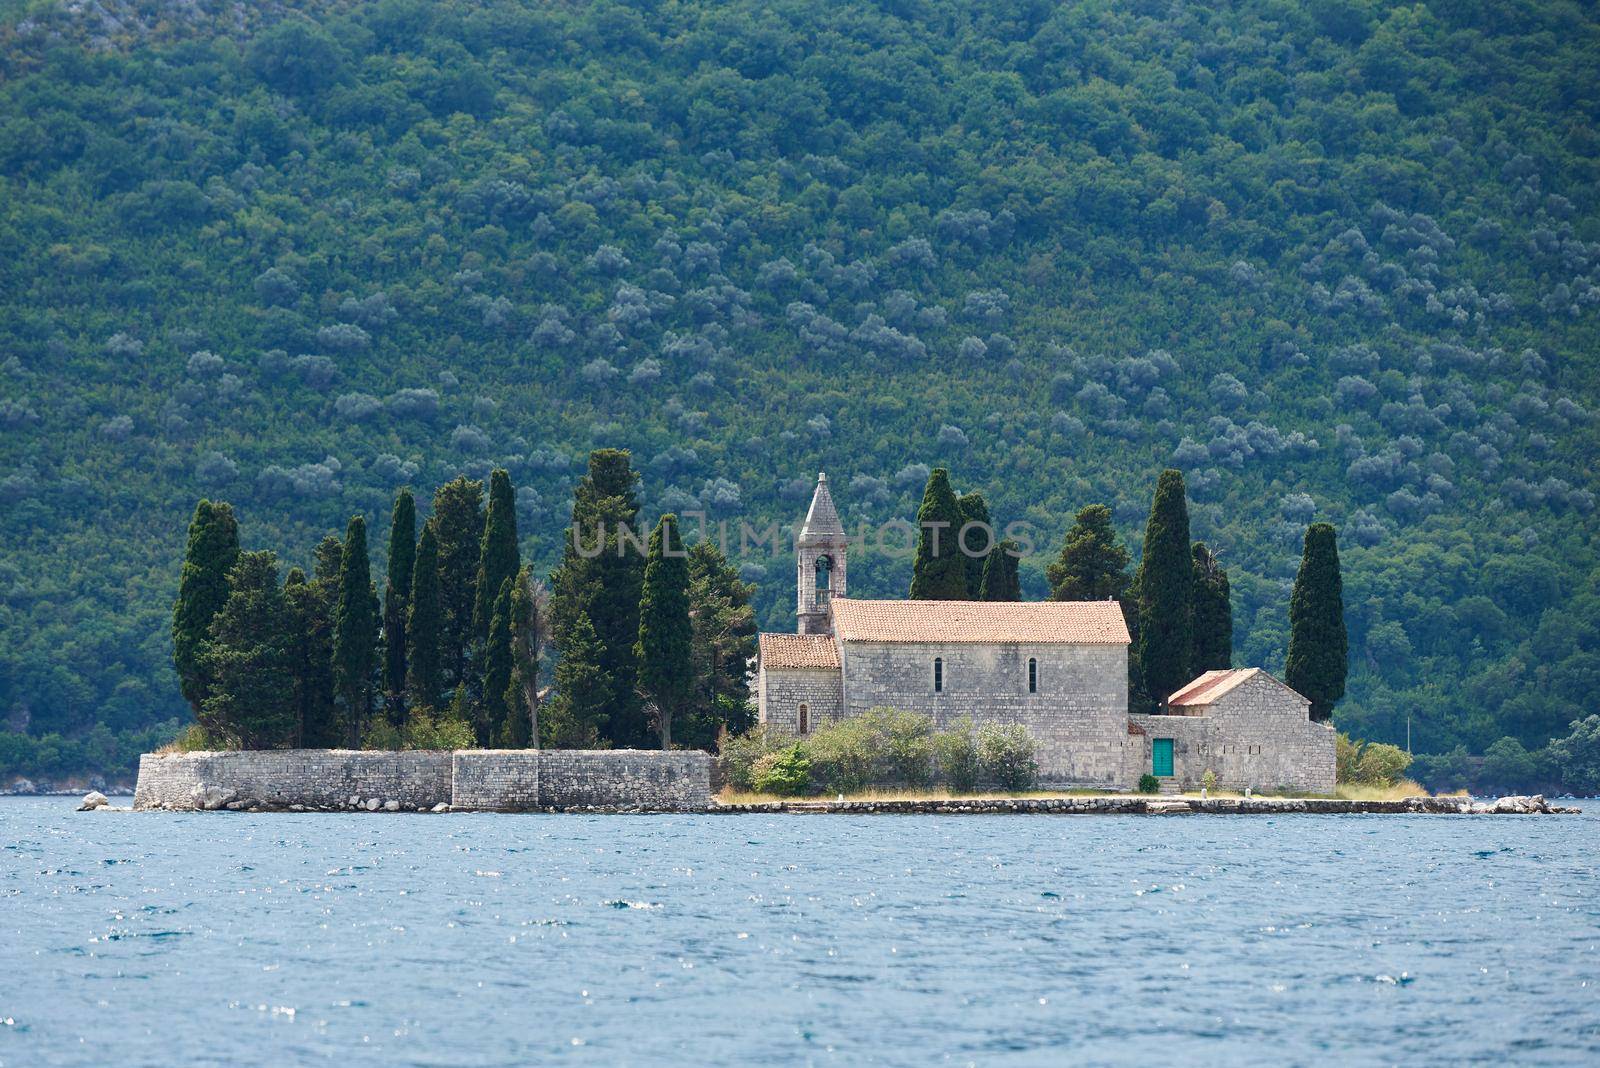 Monastery of St. George on a secluded island in the Adriatic Sea in Montenegro.